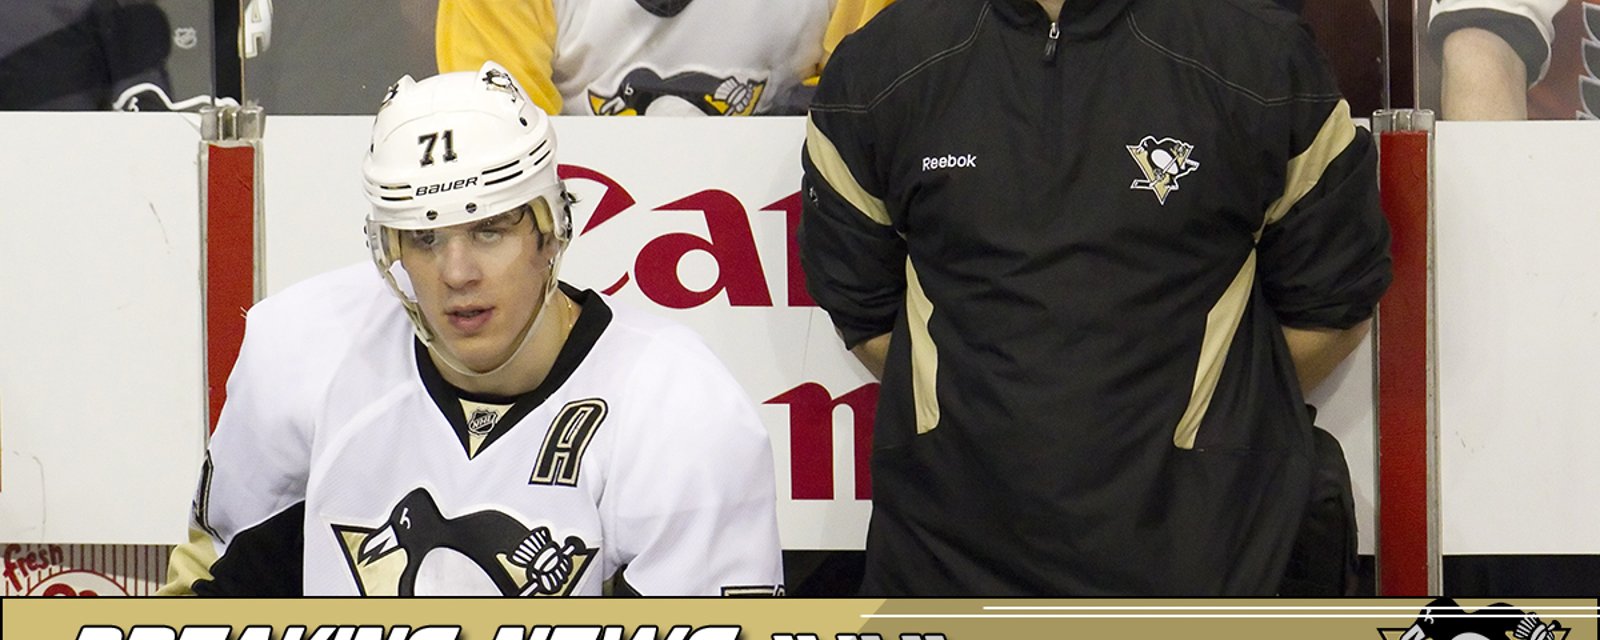 Breaking: Evgeni Malkin out of the lineup again!